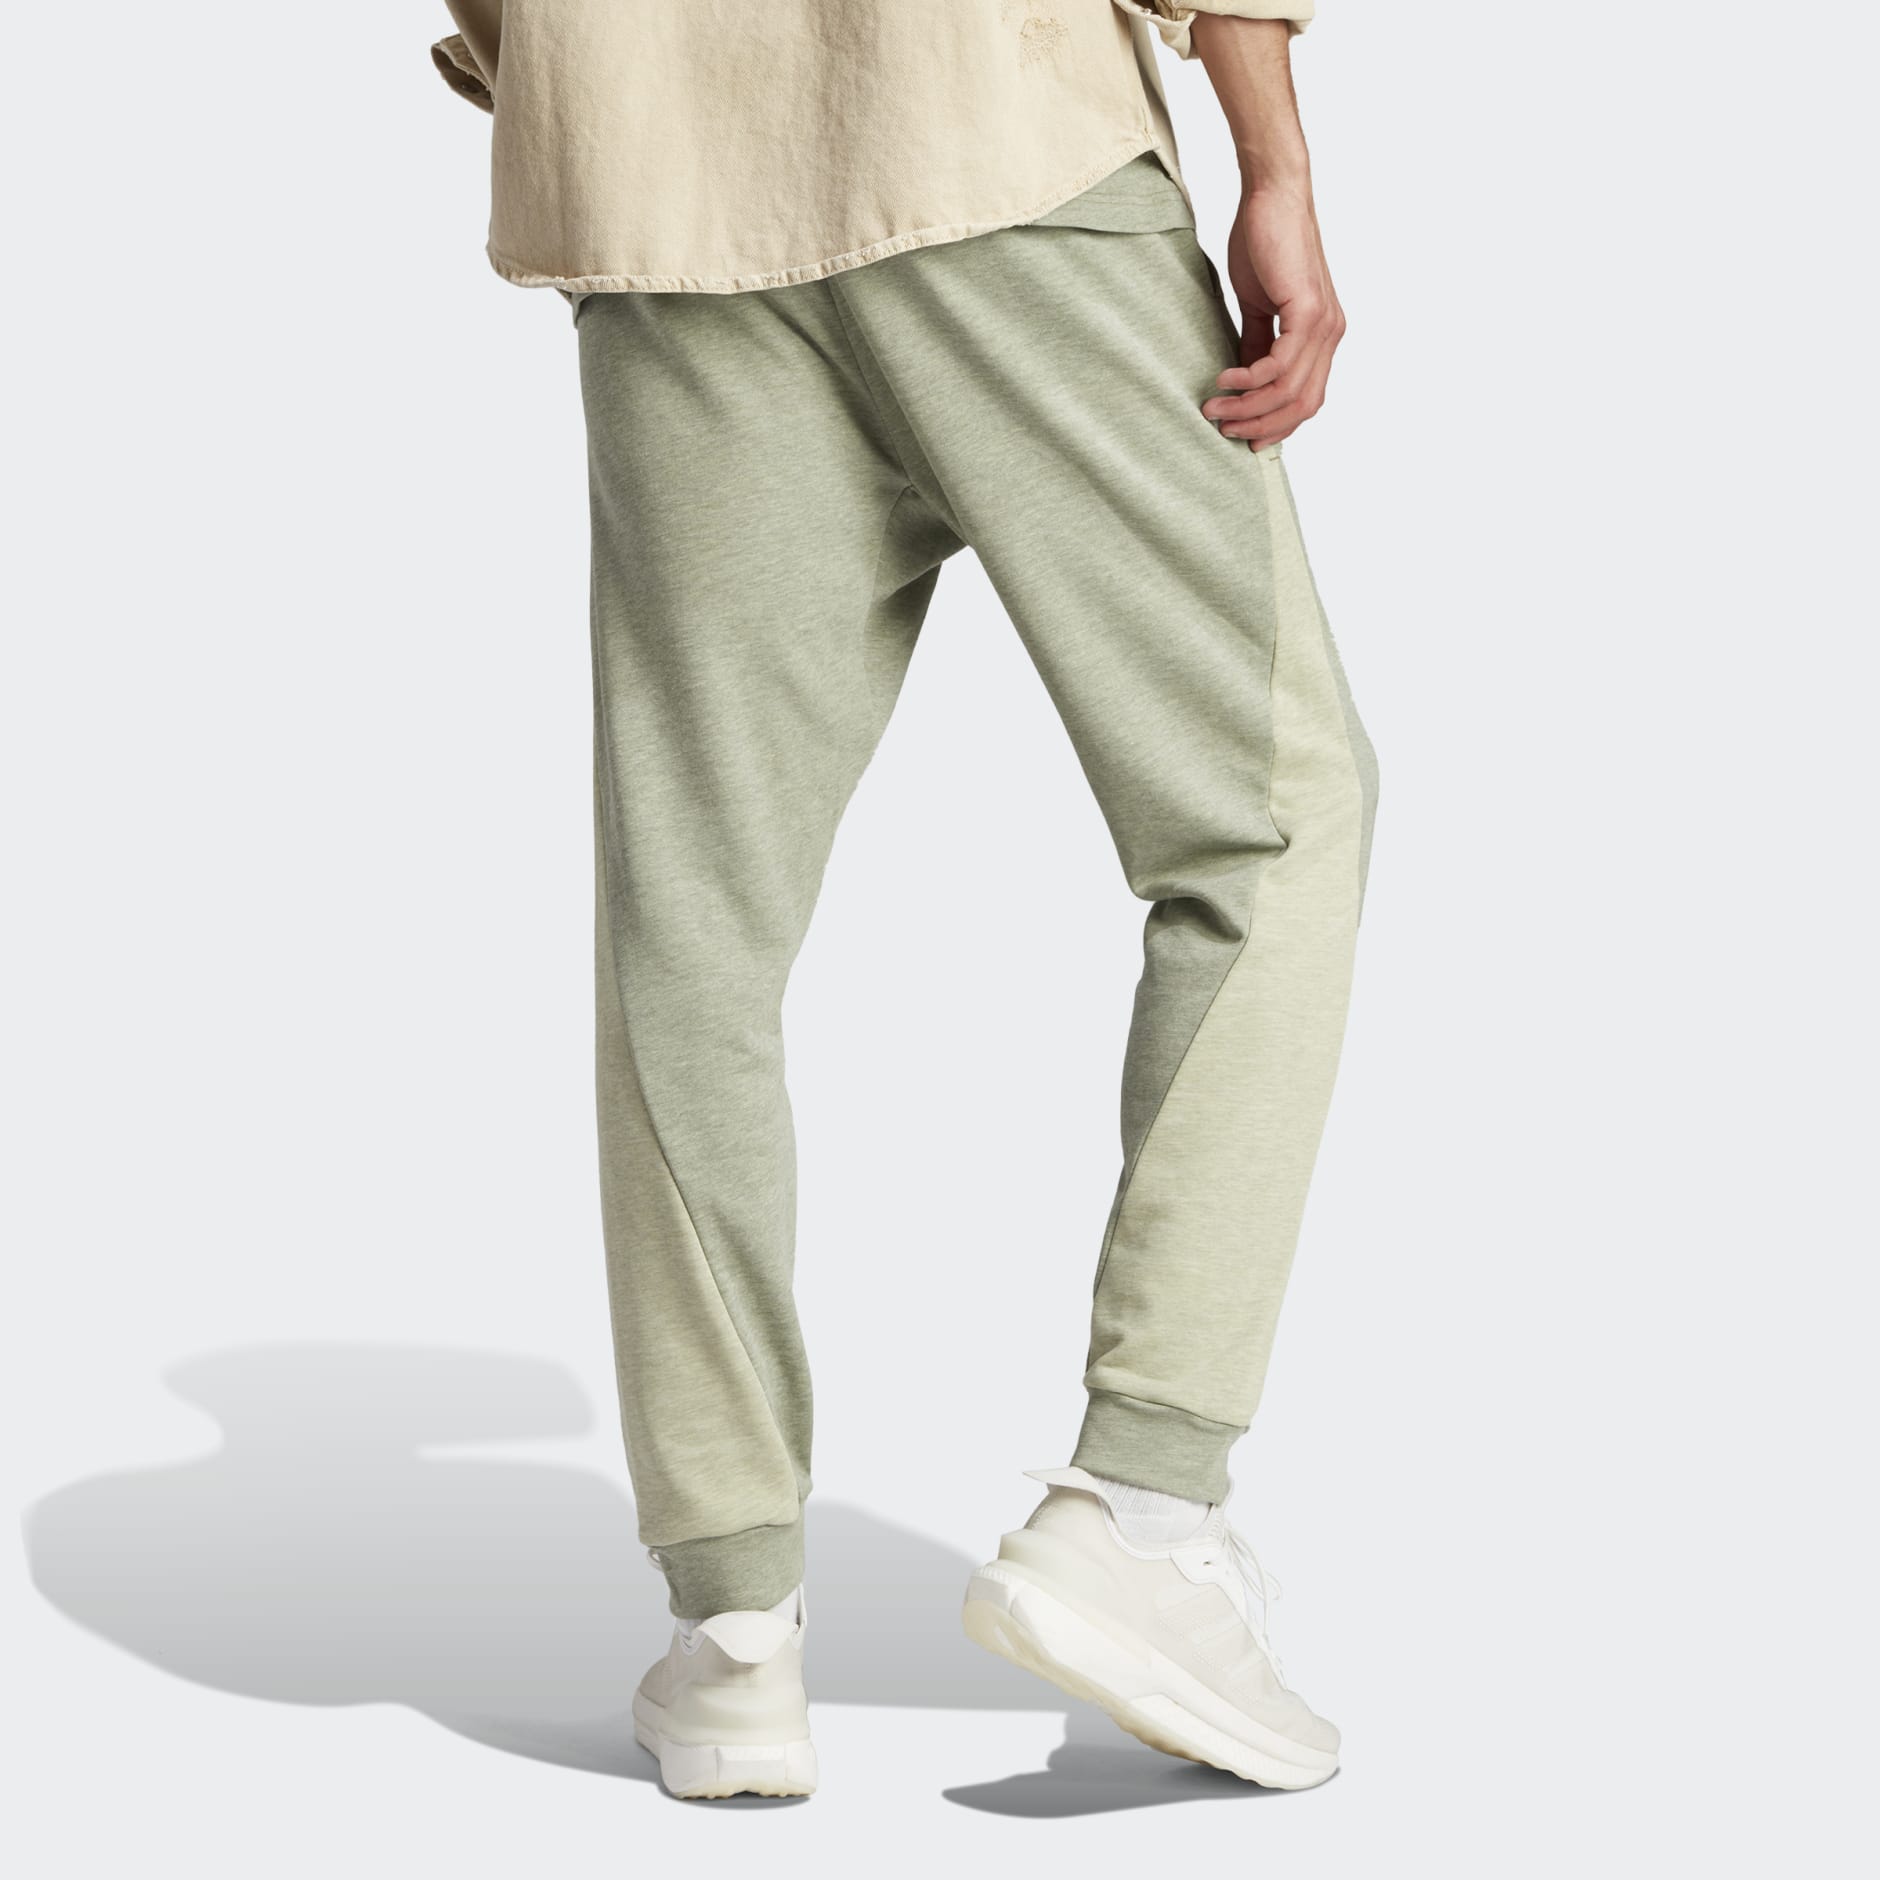 Clothing - Mélange Pants - Green | adidas South Africa